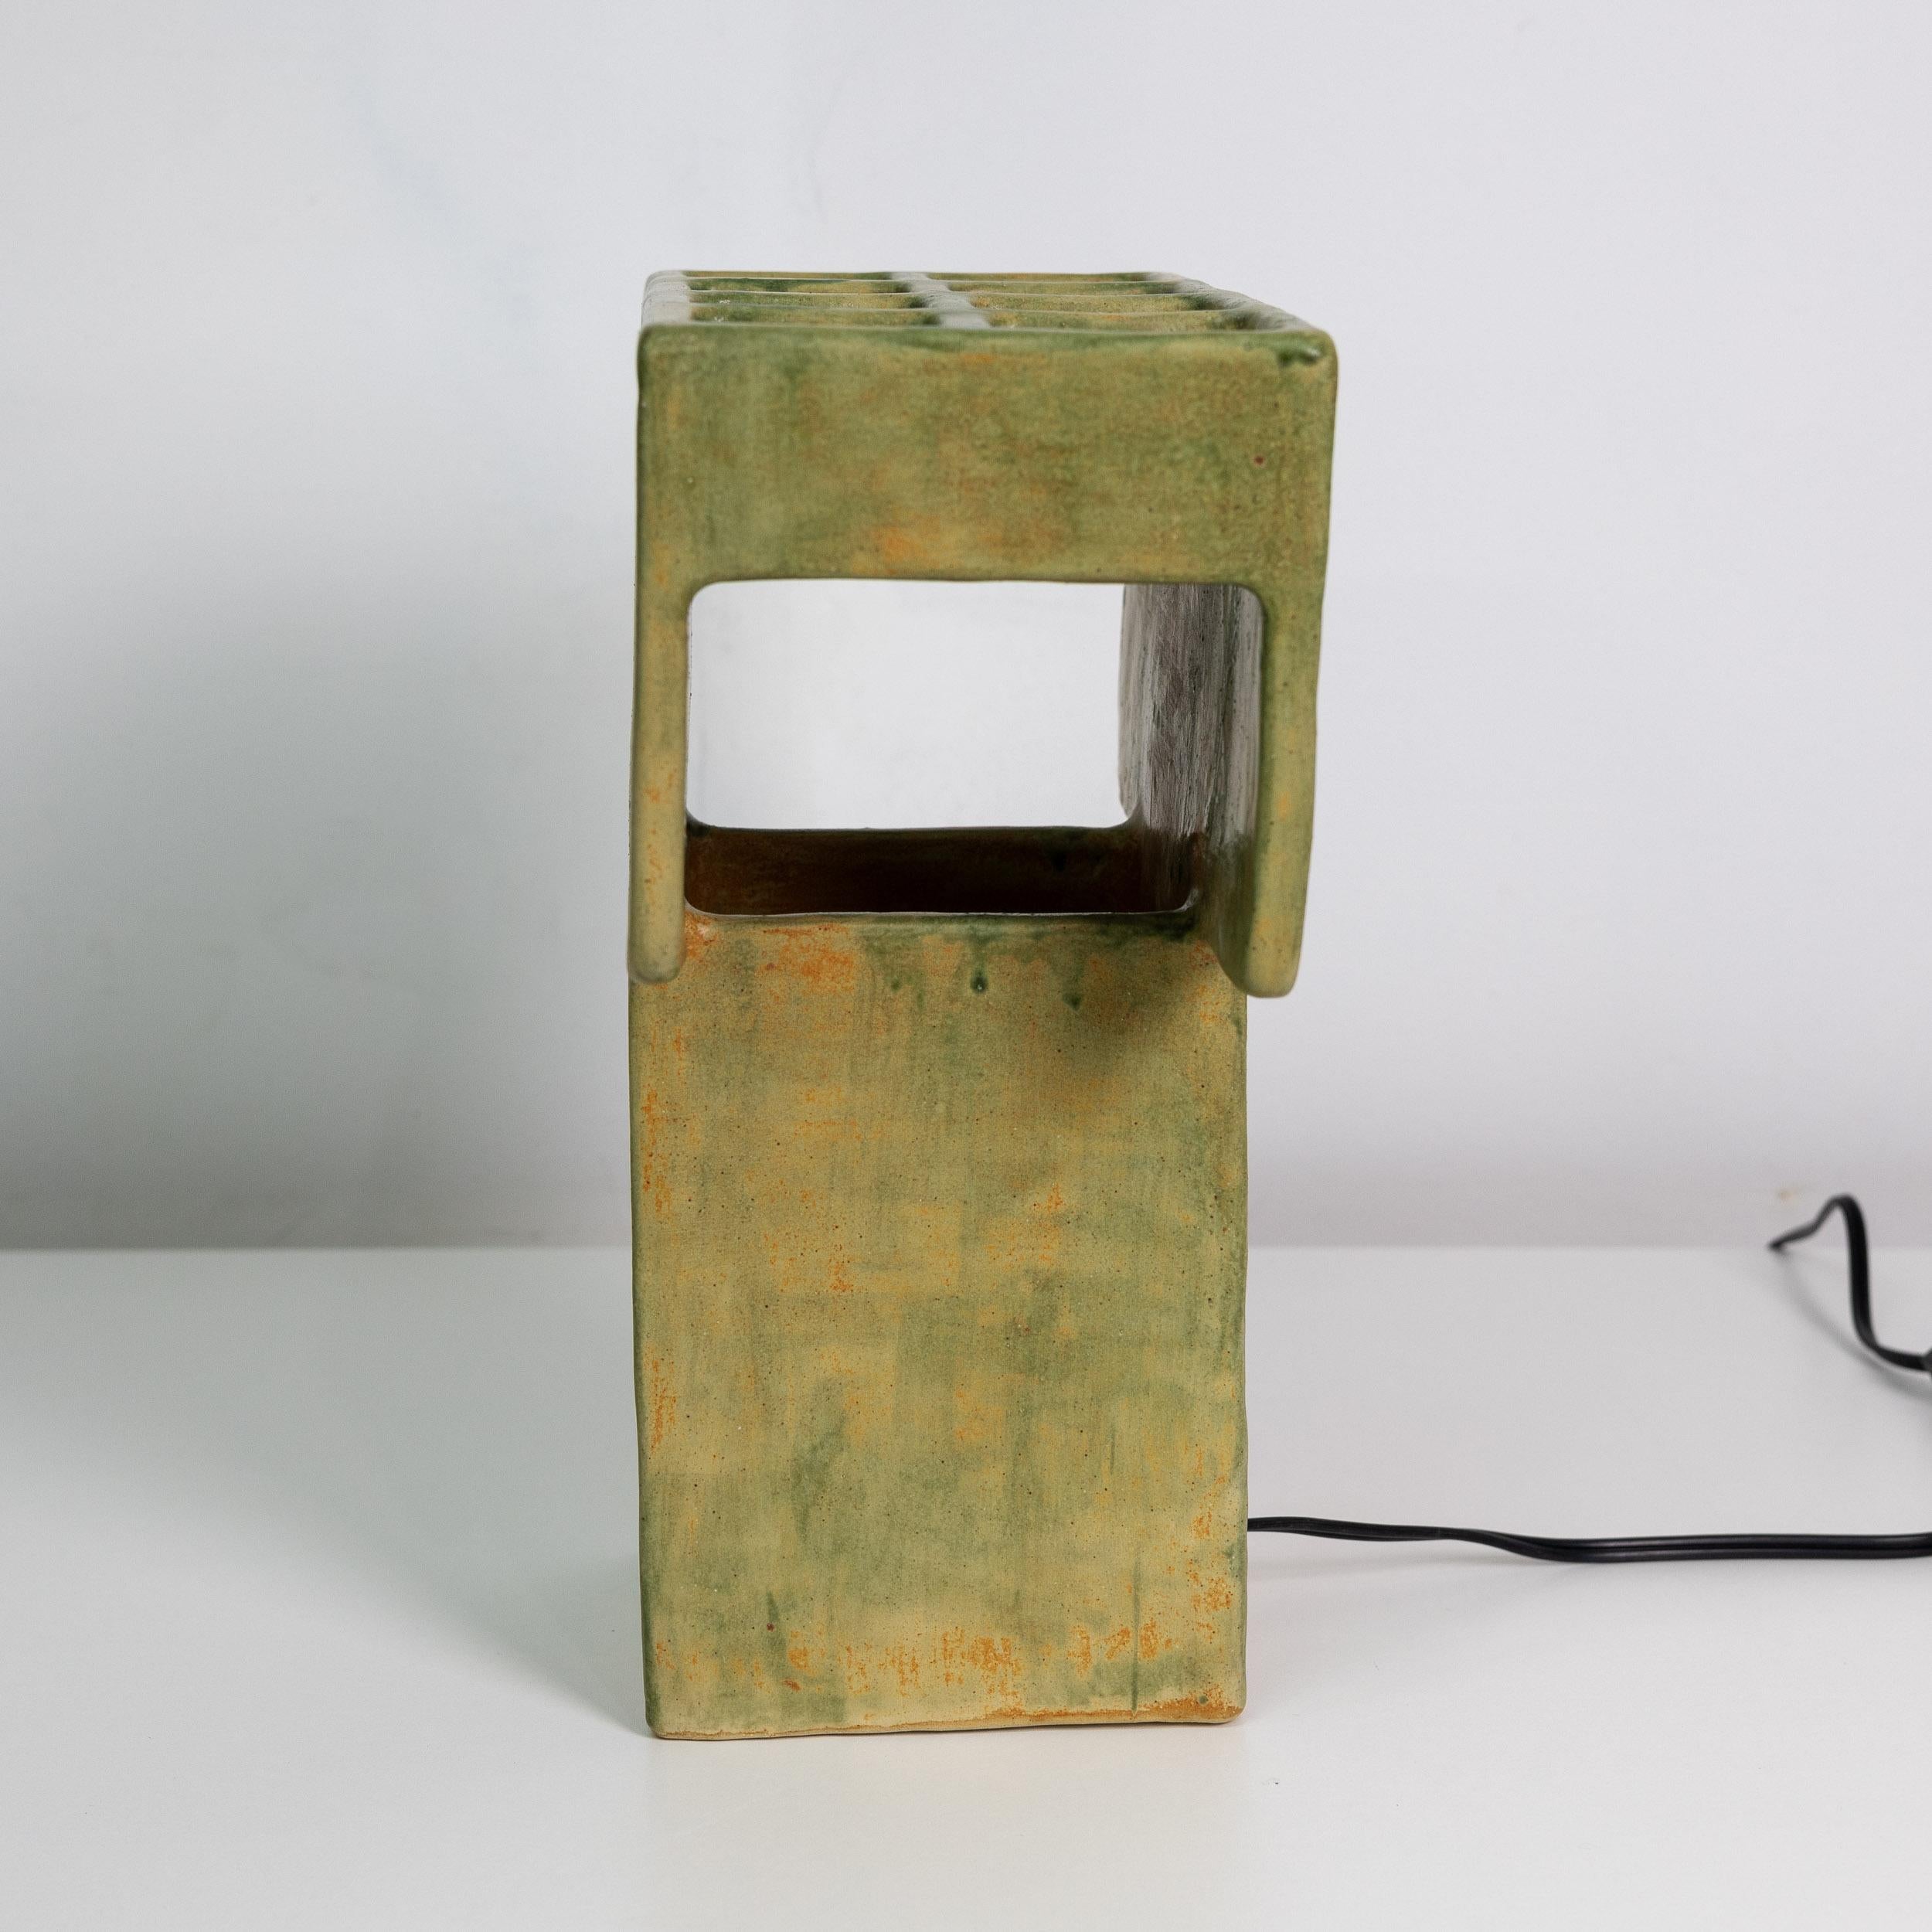 Mr. T Ceramic Table Lamp, Geometric, Brutalist, Square Table Light, Clay, Glazed For Sale 2